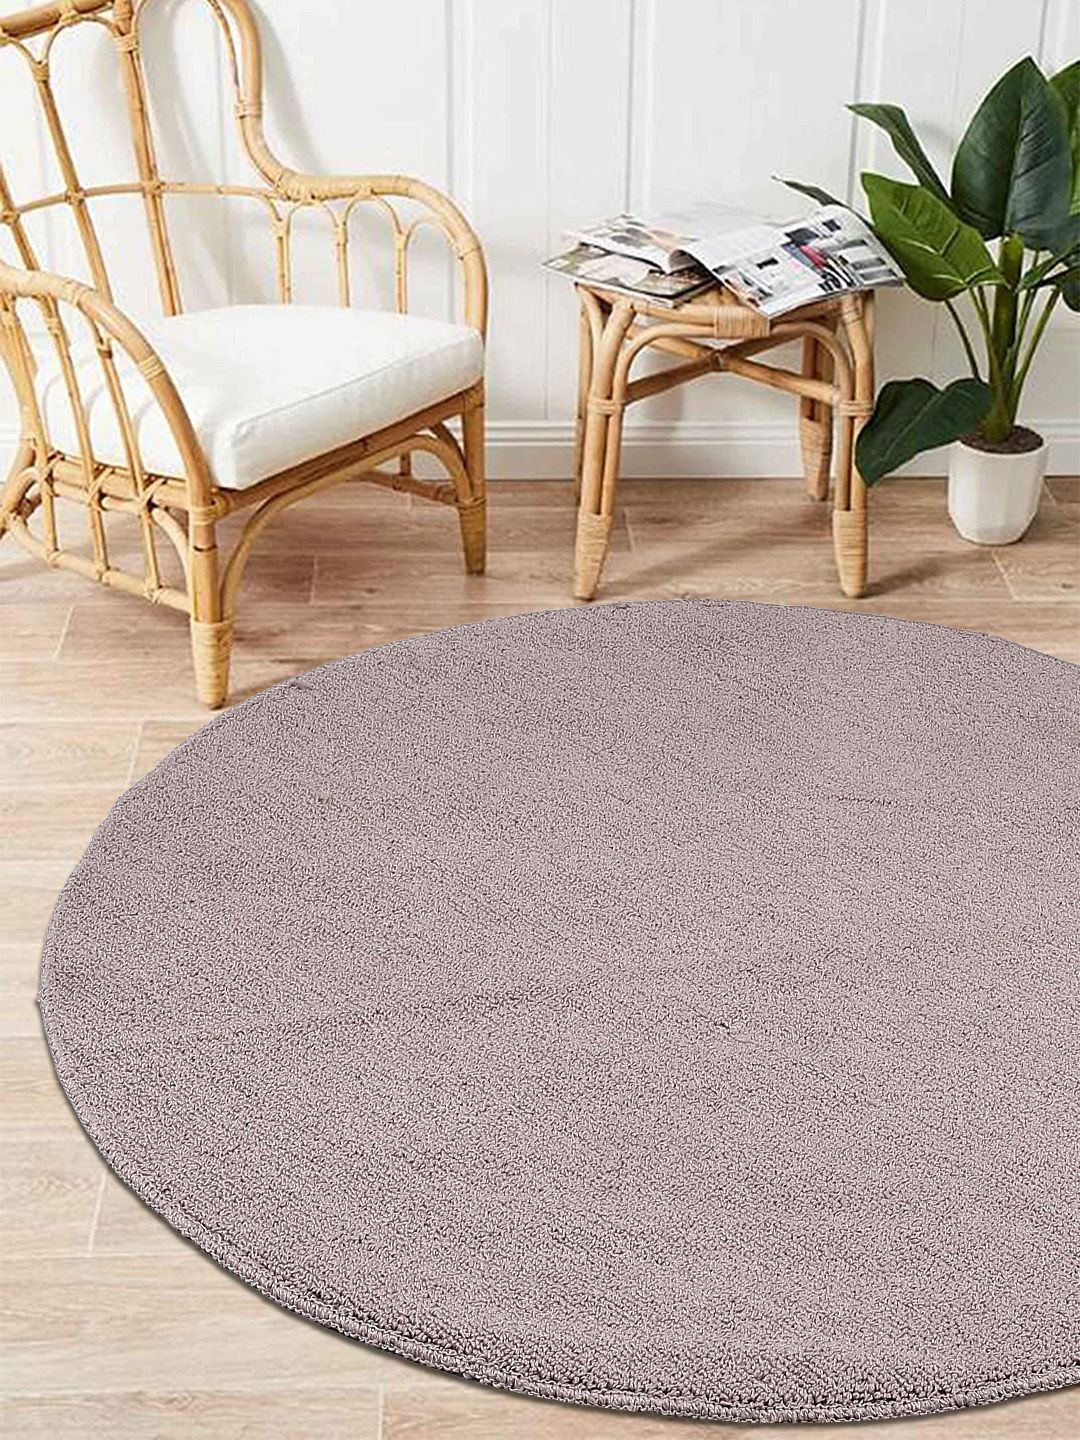 Saral Home Beige Solid PP-Yarn Round Anti-Skid Multi-Use Floor Mat Price in India